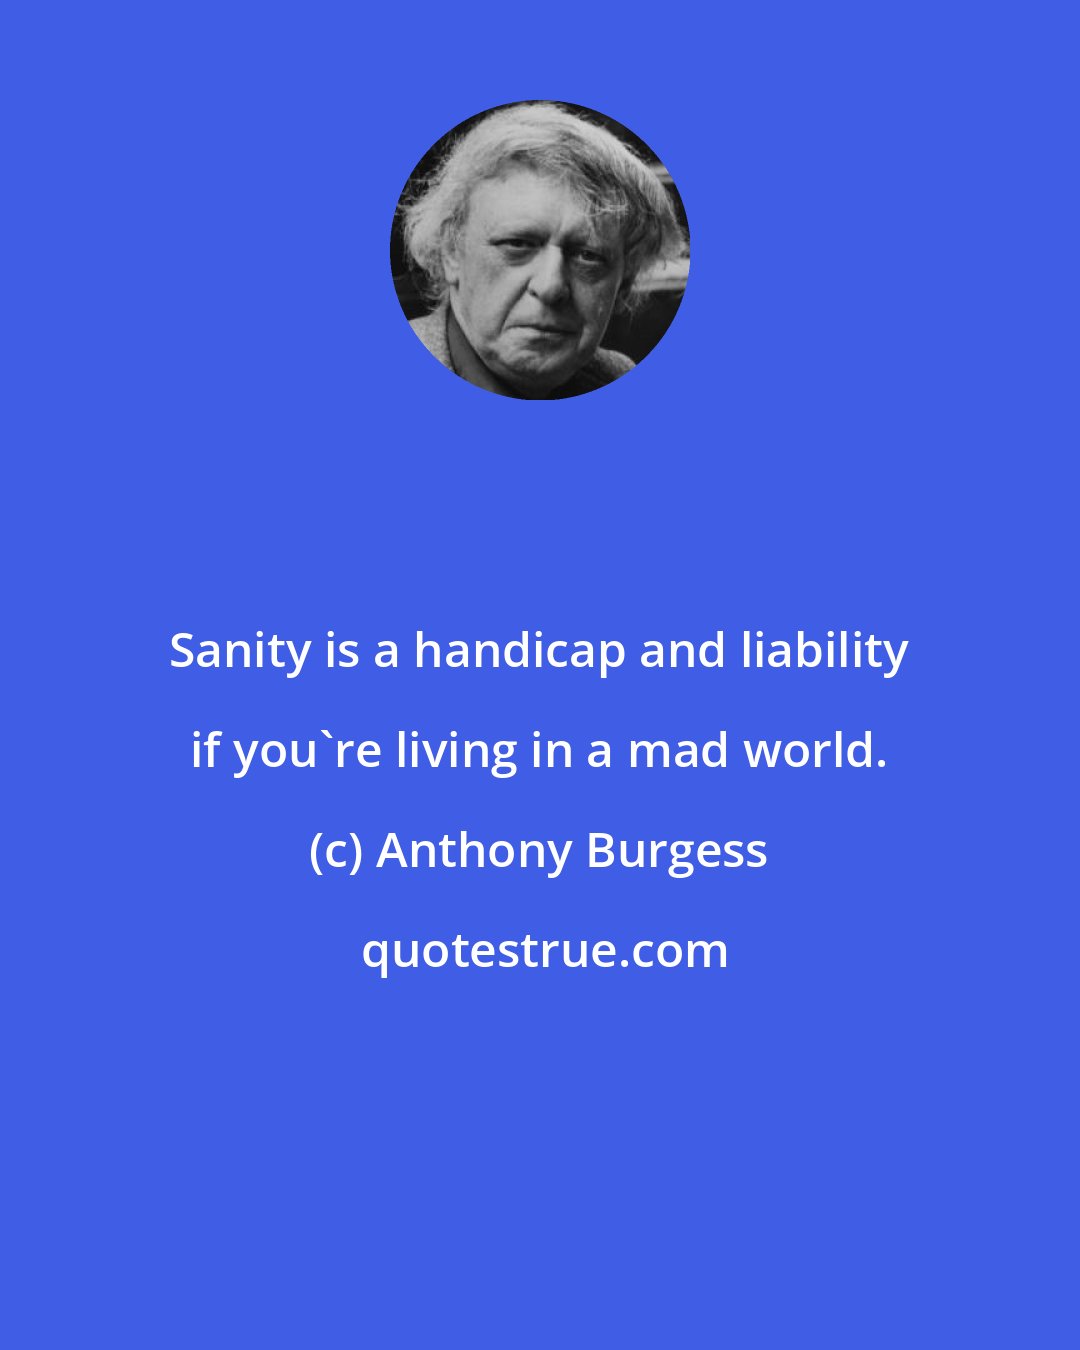 Anthony Burgess: Sanity is a handicap and liability if you're living in a mad world.